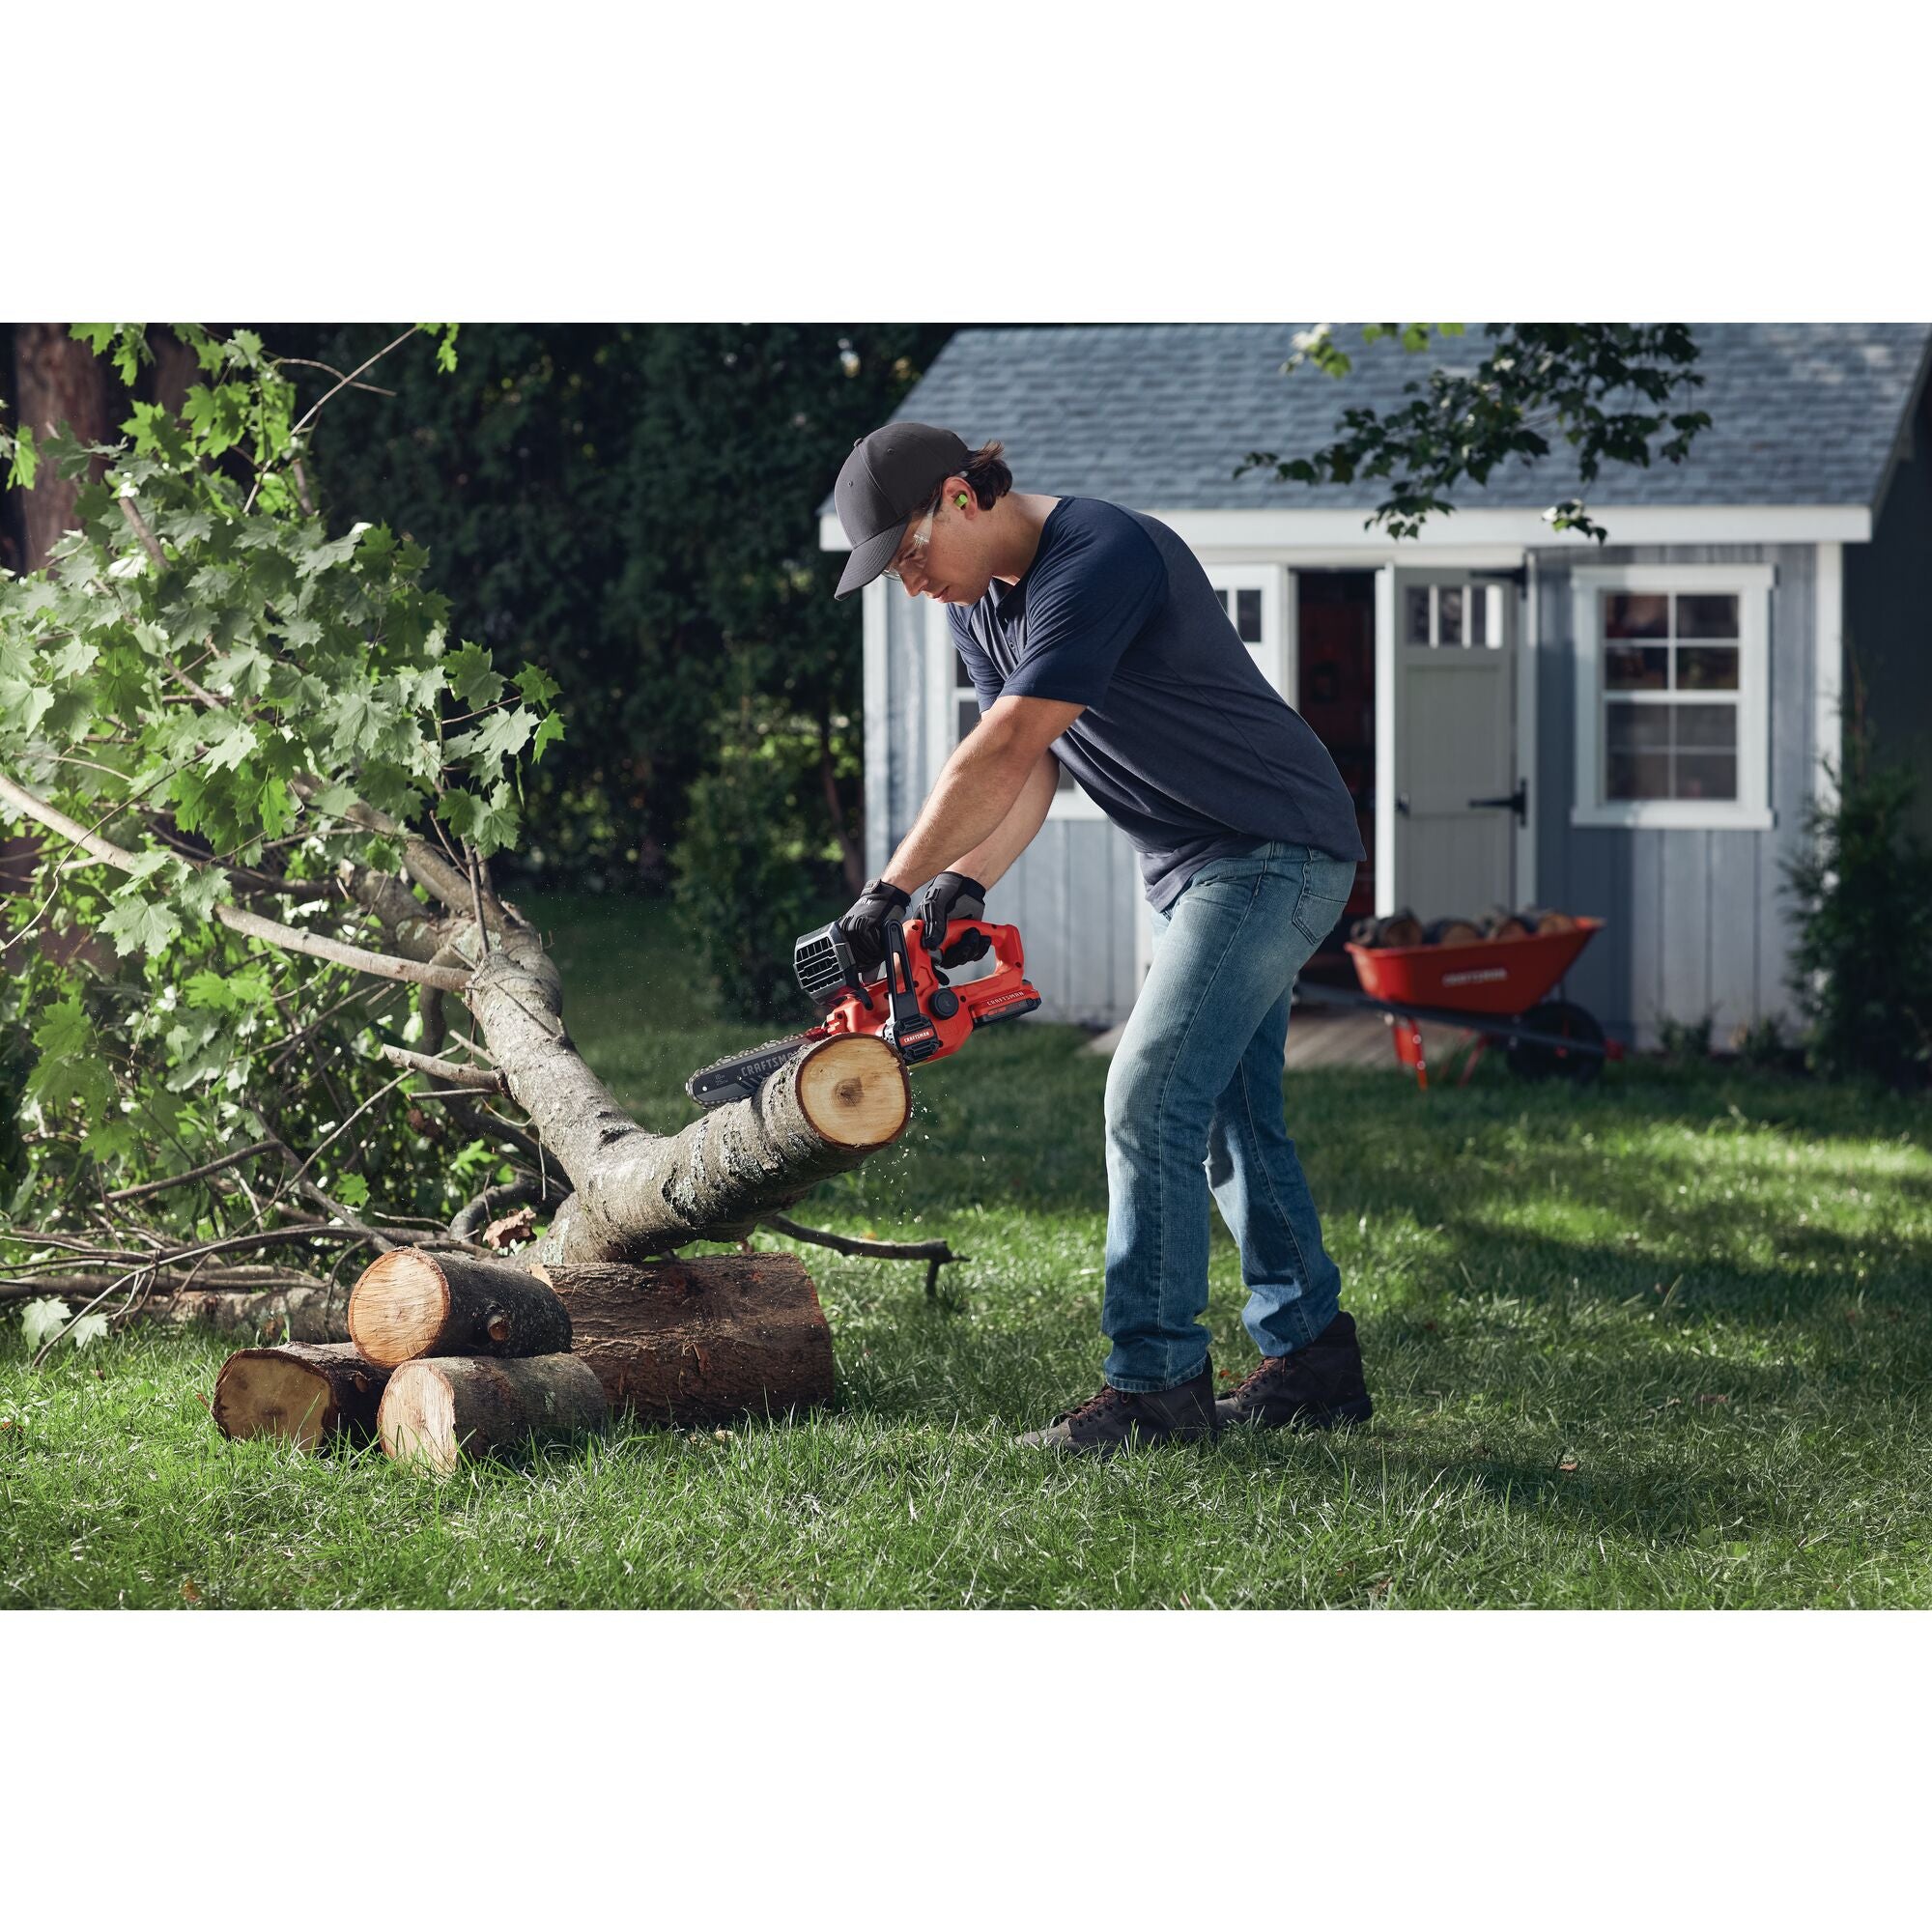 CRAFTSMAN V20 20-volt Max 8-in Battery Pole Saw (Battery and